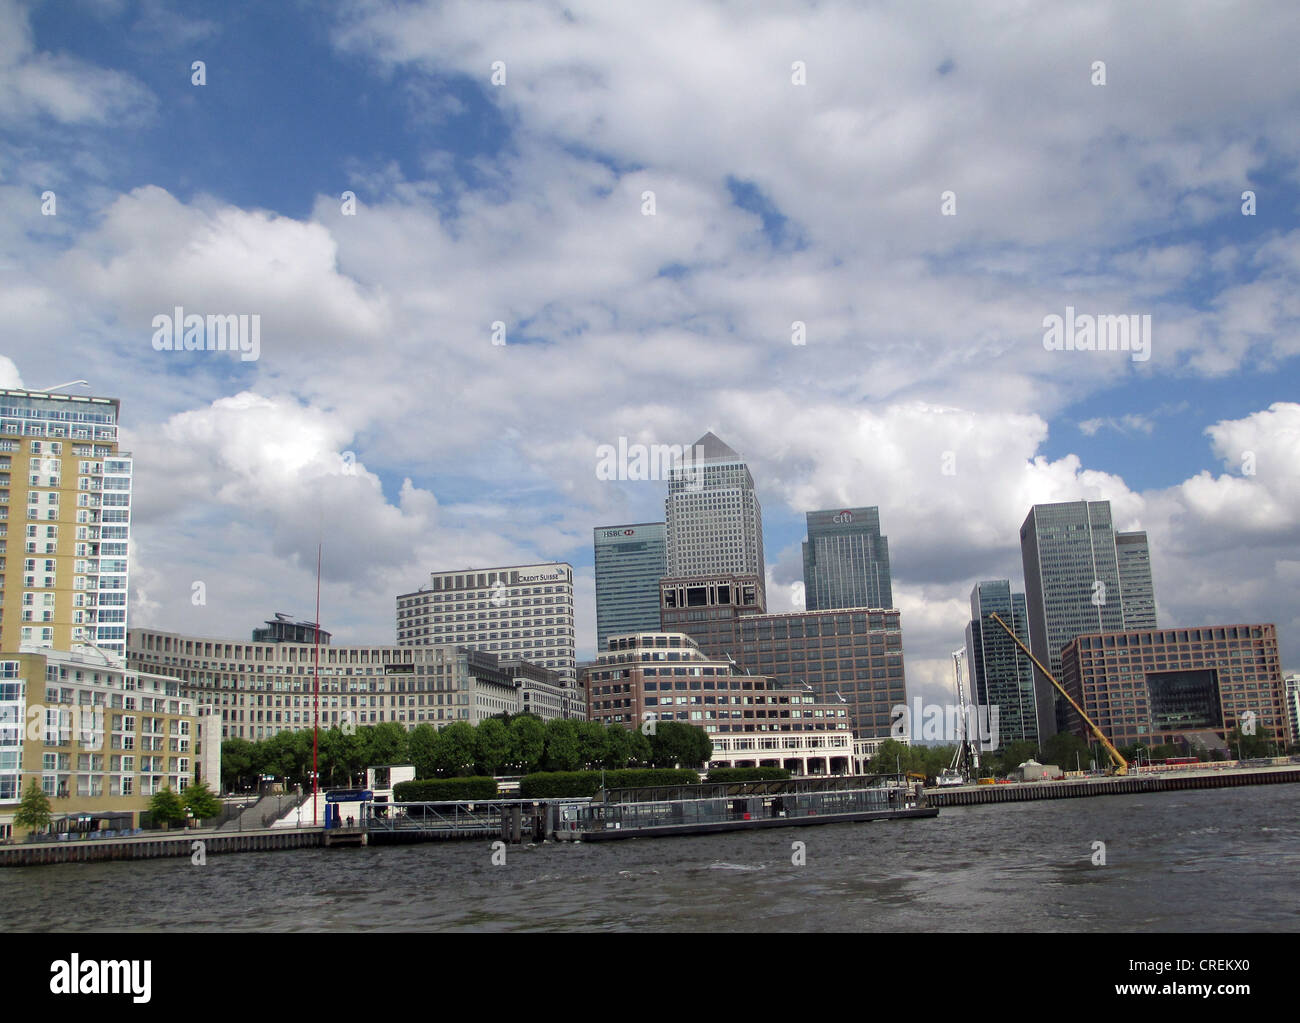 CANARY WHARF business district in Poplar, London viewed from the Thames. Photo Tony Gale Stock Photo